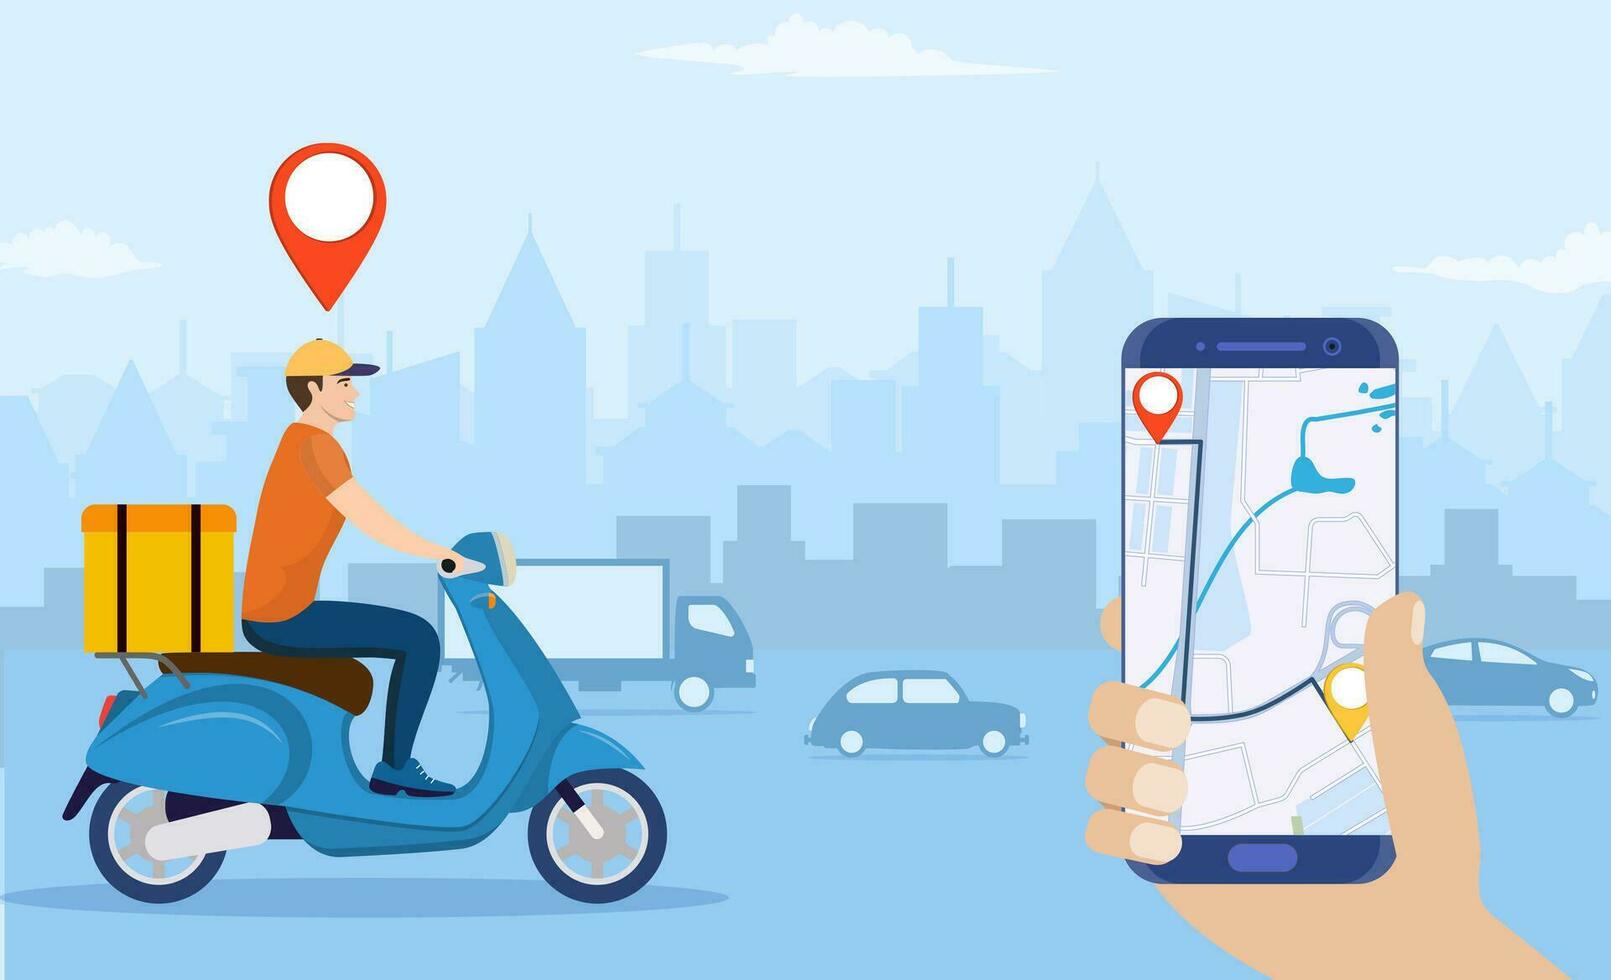 Online delivery service concept, online order tracking, delivery home and office. scooter courier. Online pizza order. goods shipping, food online ordering. Vector illustration in flat style